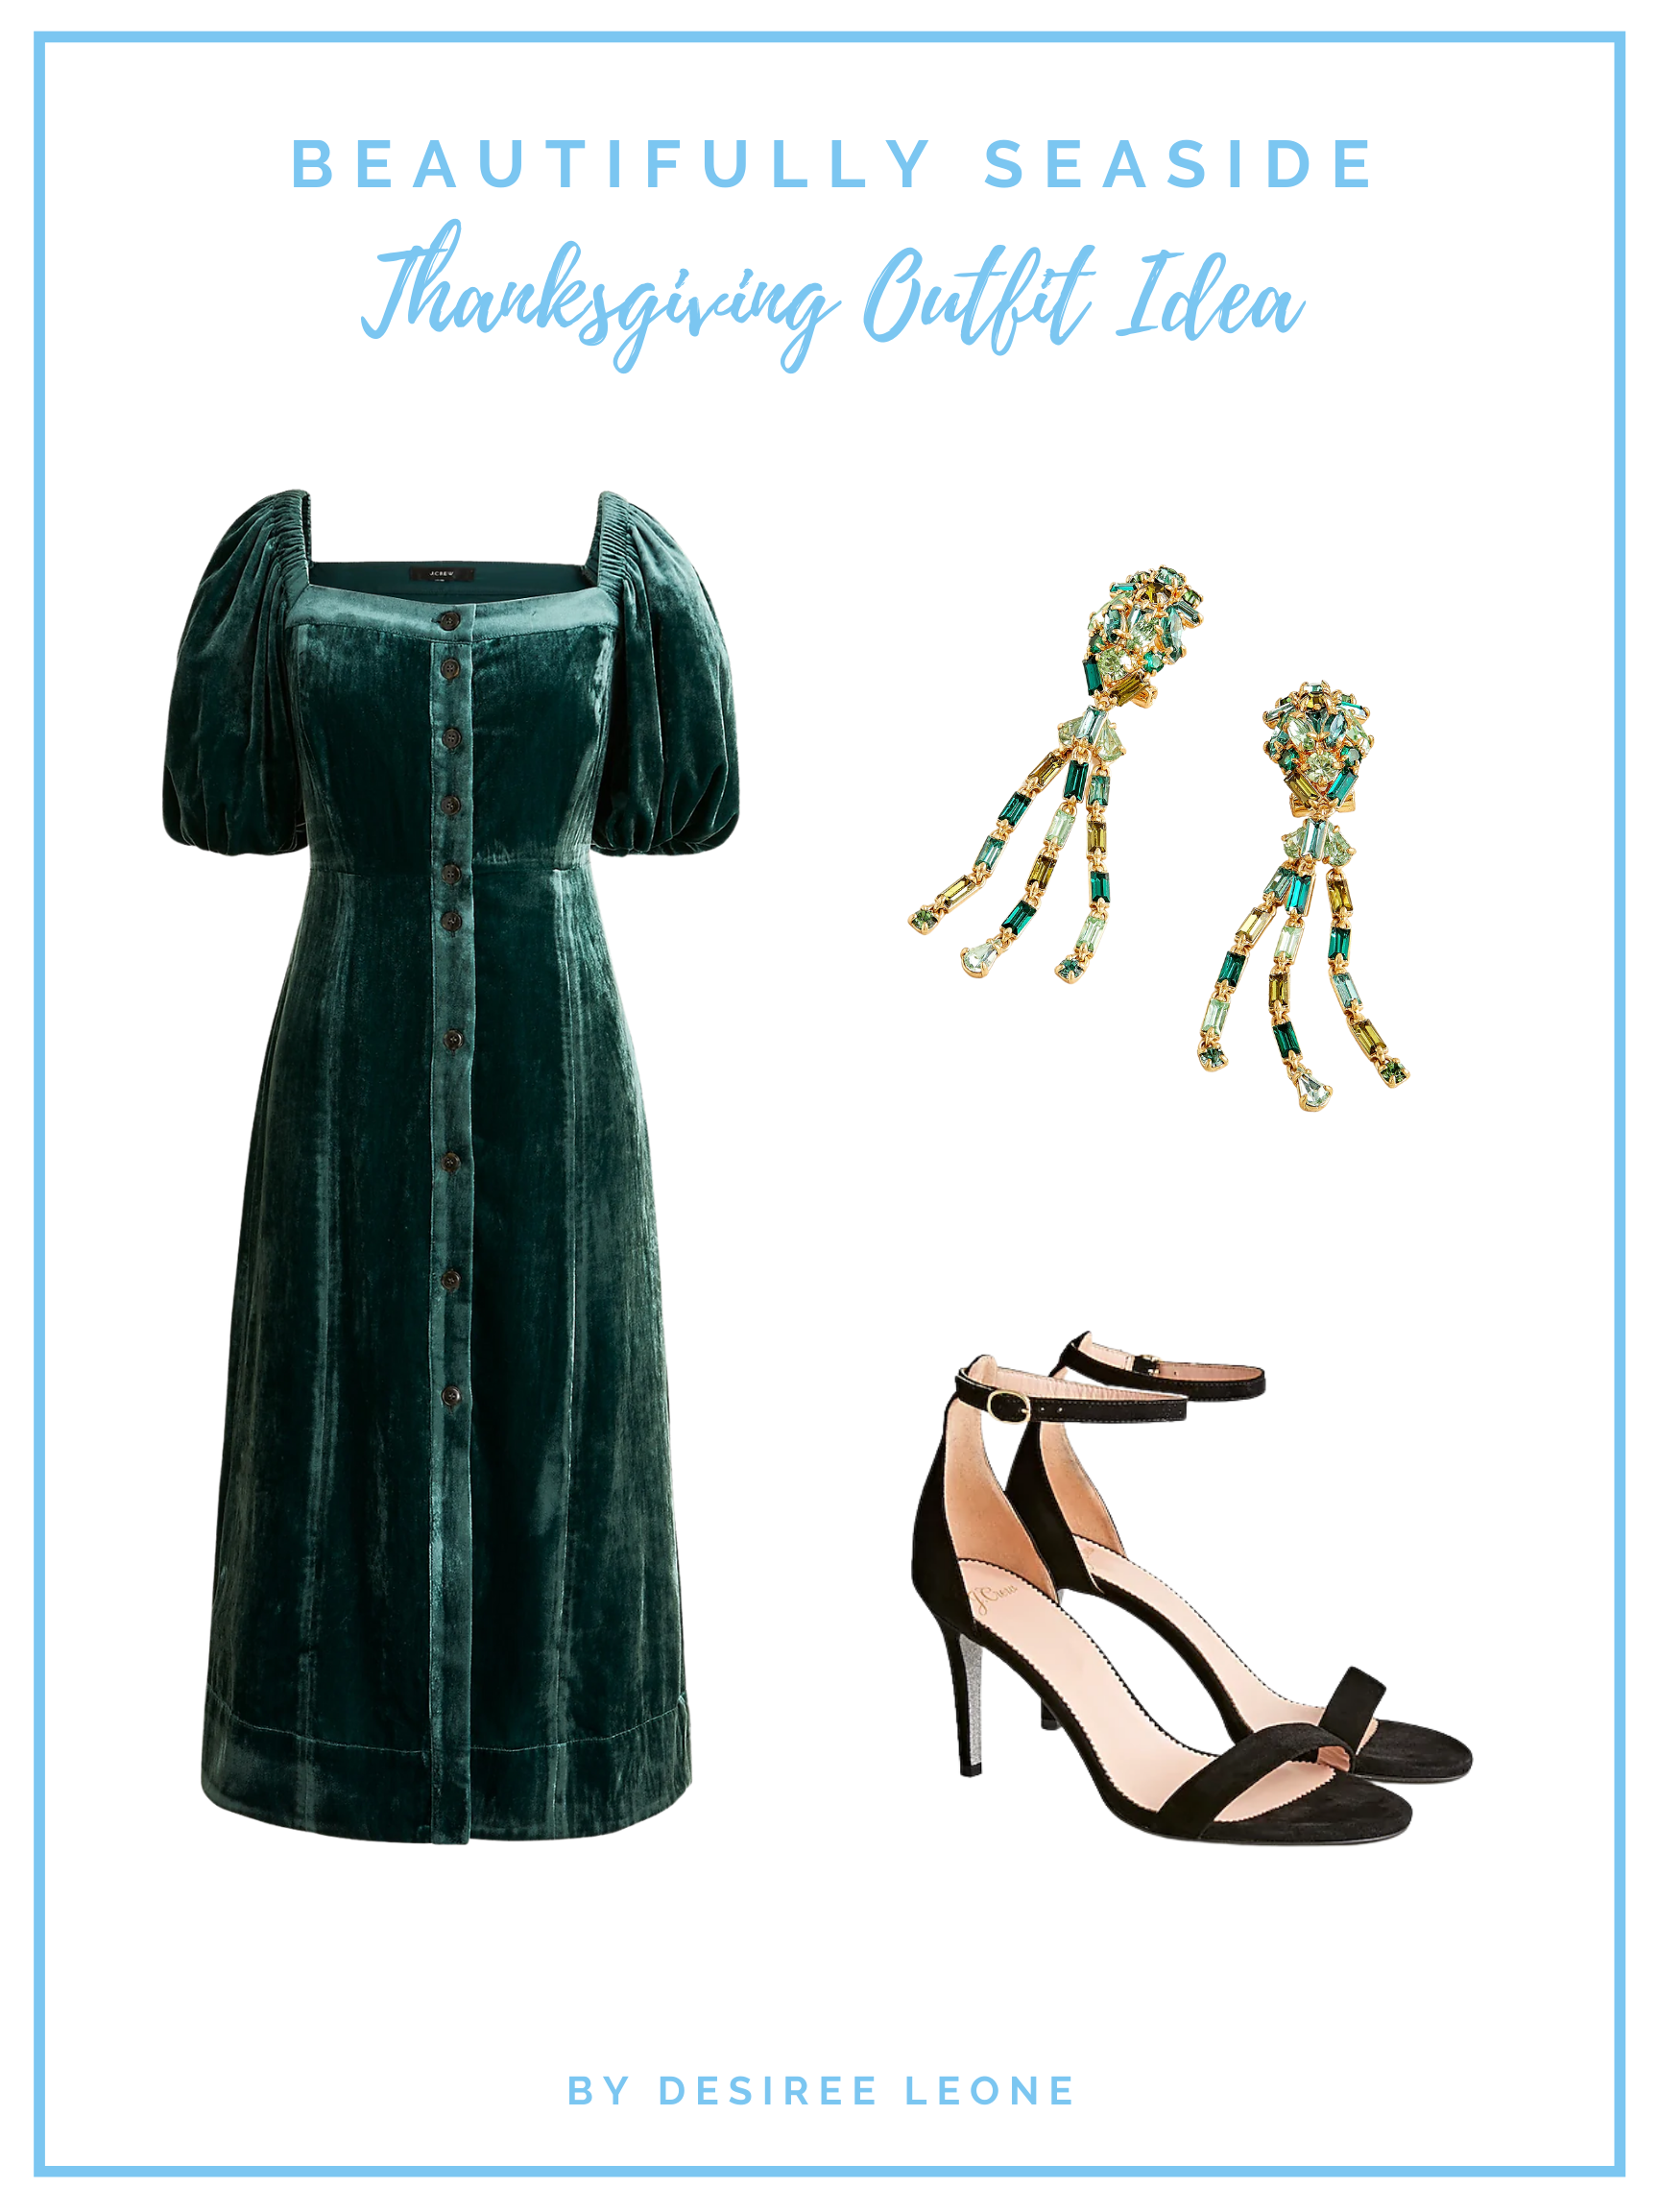 Thanksgiving Outfits 2021 - Delightfully Dorn